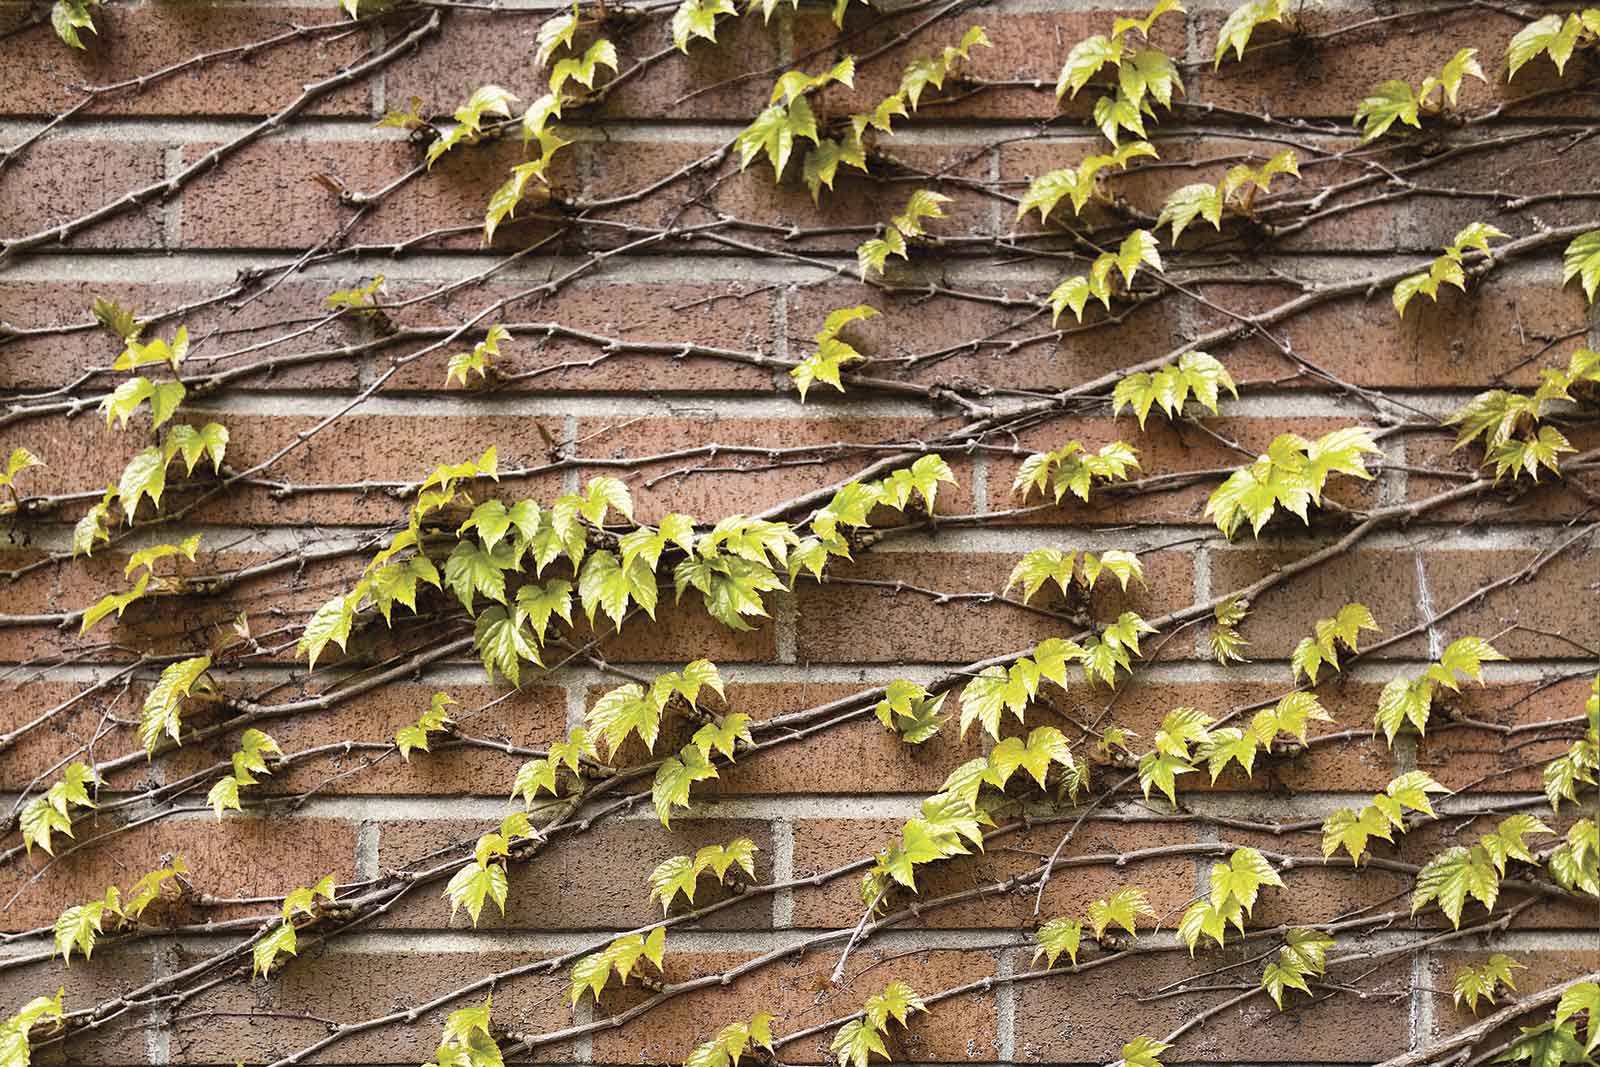 Red brick wall on the exterior of New College, covered in vines and leaves.